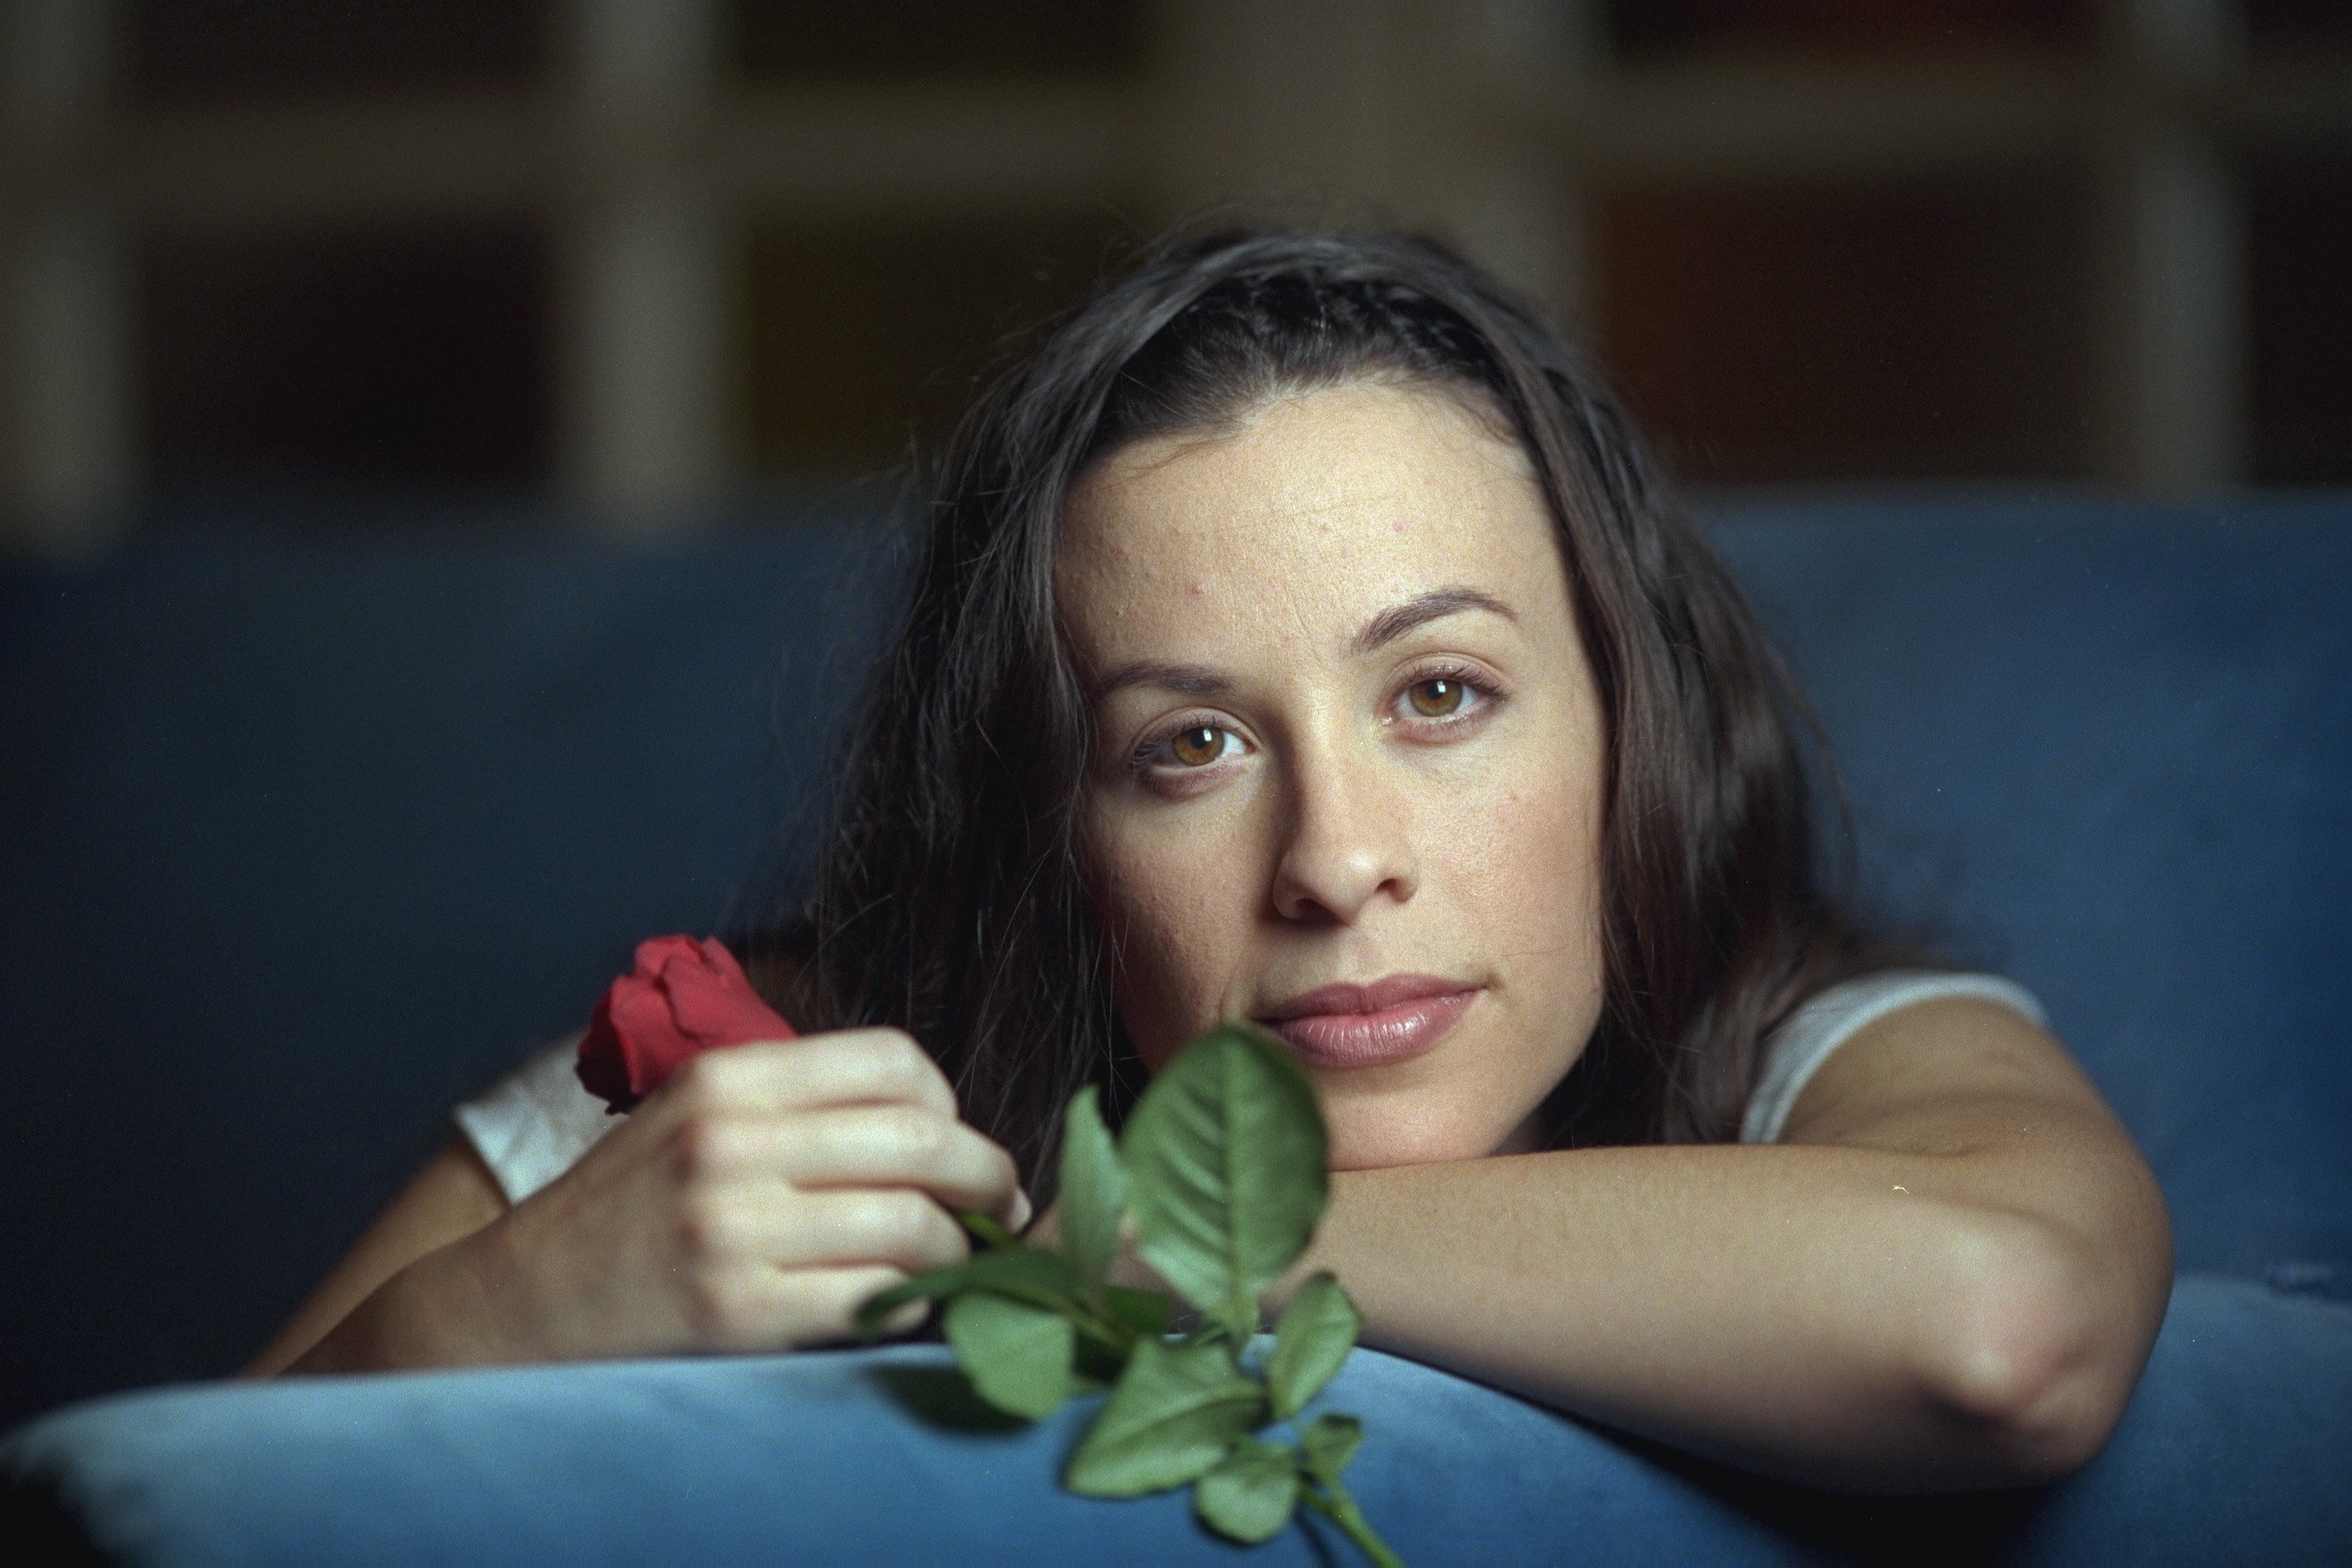 Alanis Morissette with a rose